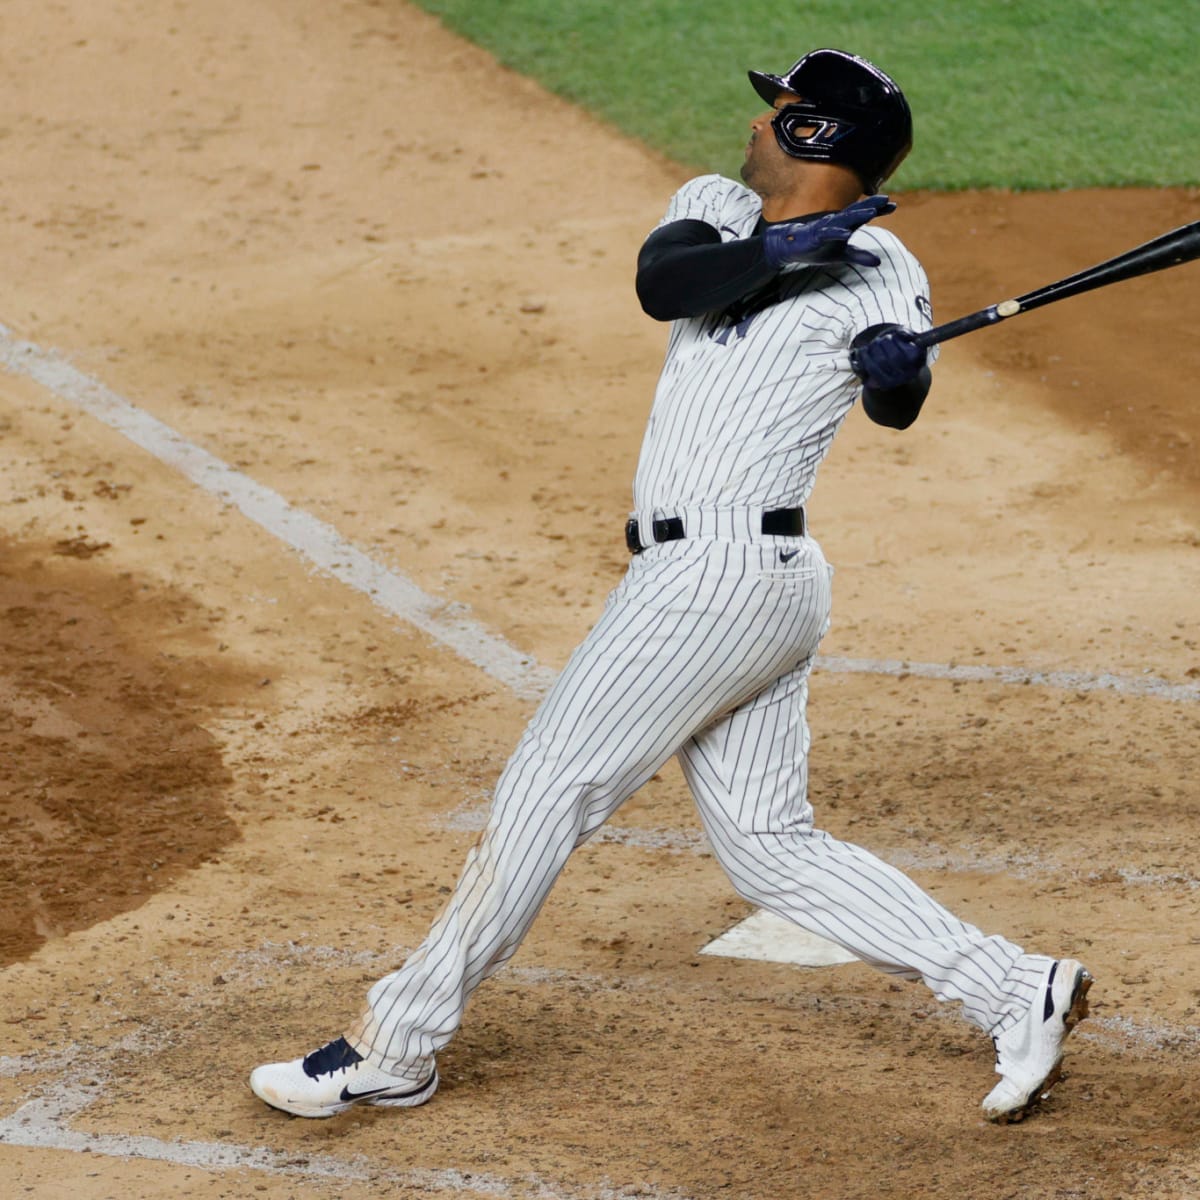 Aaron Hicks designated for assignment by Yankees 